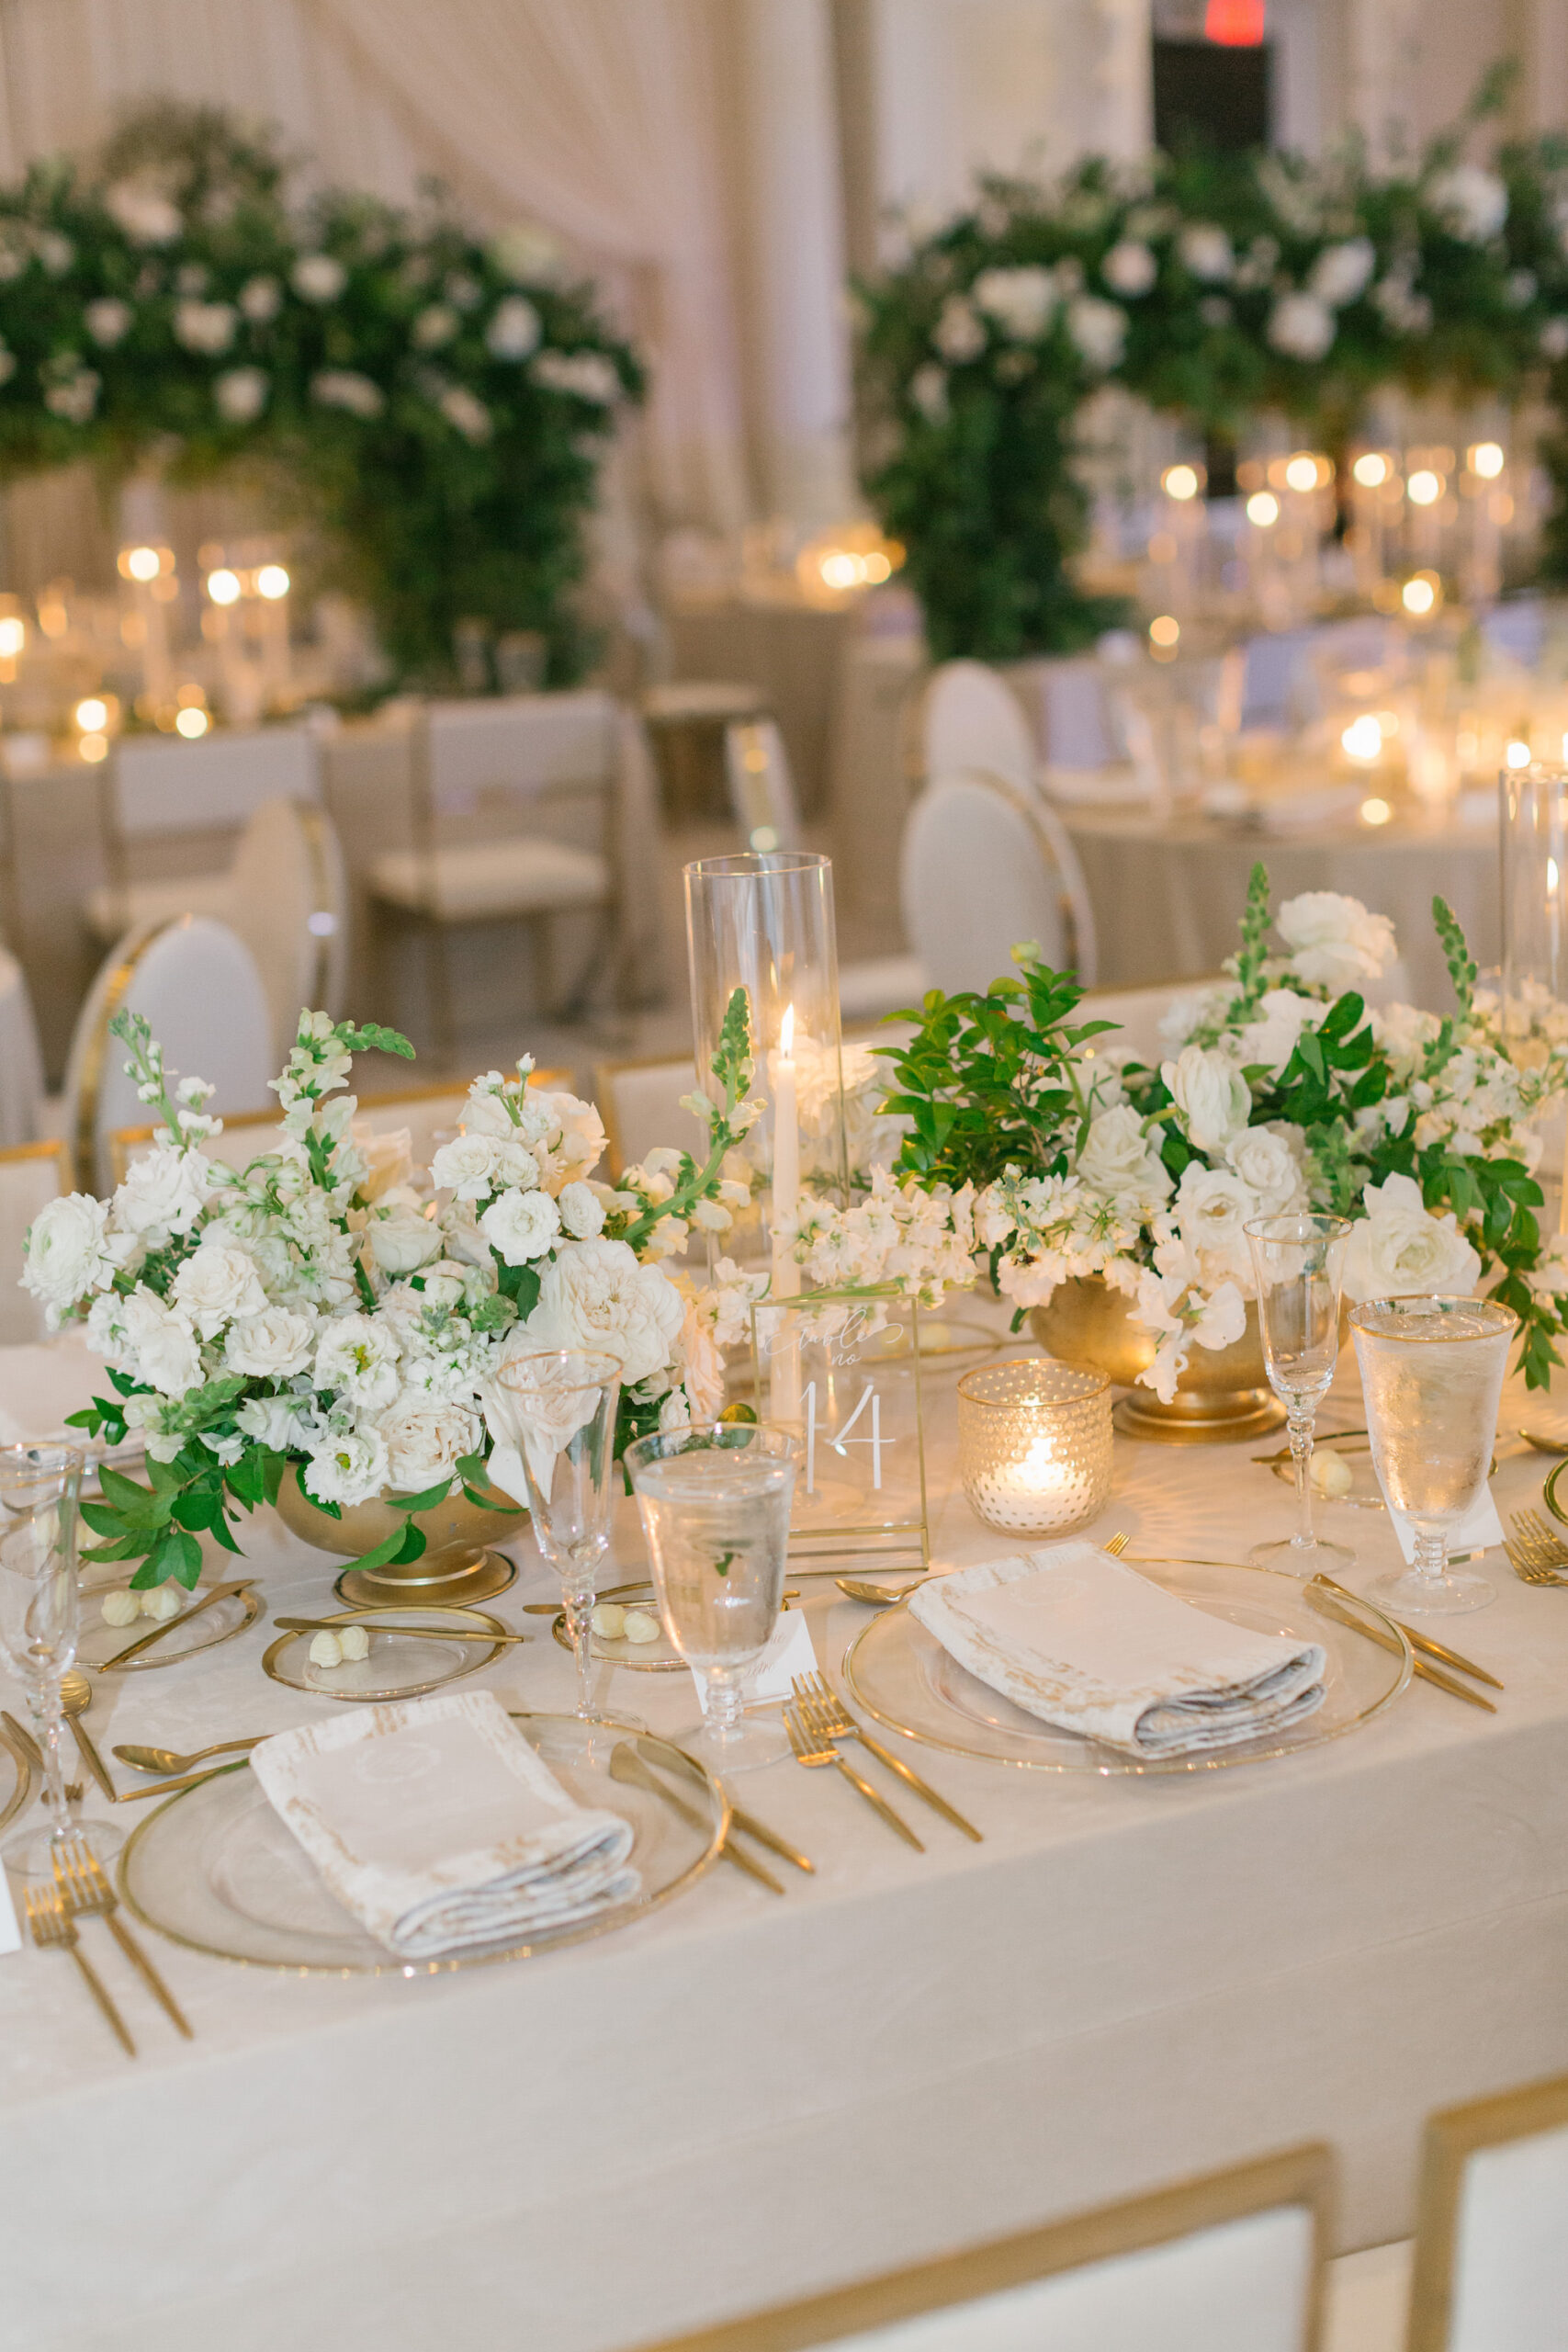 Luxurious Ballroom Wedding Reception Inspiration | Champagne Linen | Gold Rimmed Charger with Gold Flatware | White Flowers with Greenery Centerpiece Ideas | Hurricane Taper Candle Holders